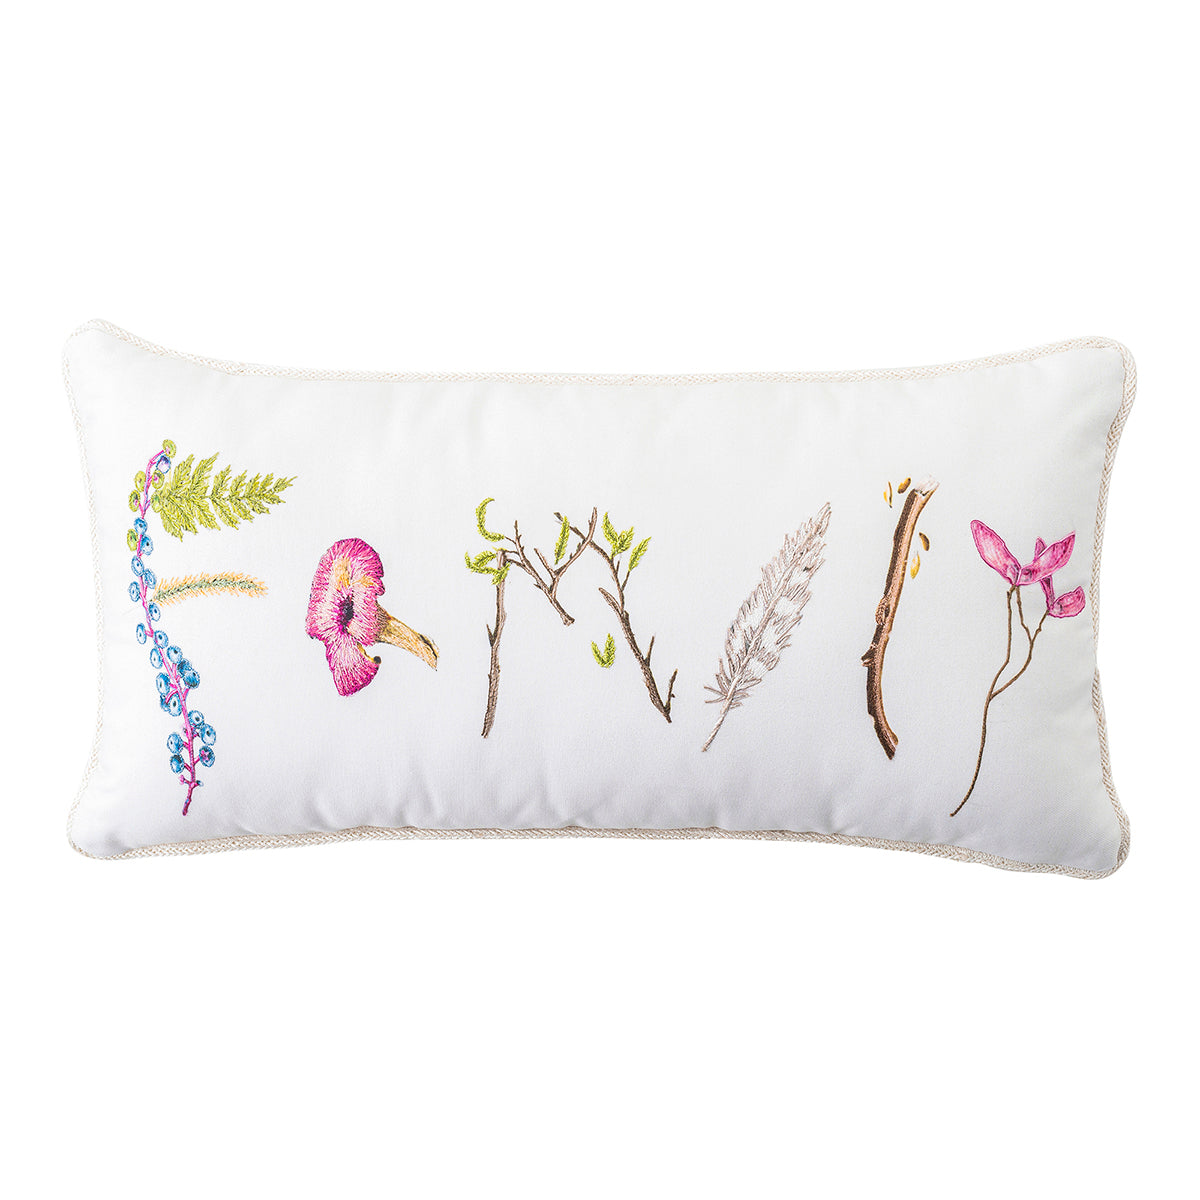 Featuring intricate embroidery to spell out one of our favorite sentiments of Family, our new collection of Forest Walk pillows are beautifully printed in vibrant colors and decorated with found treasures from the forest floor. Stuffed with 10% down and 90% feather fill.